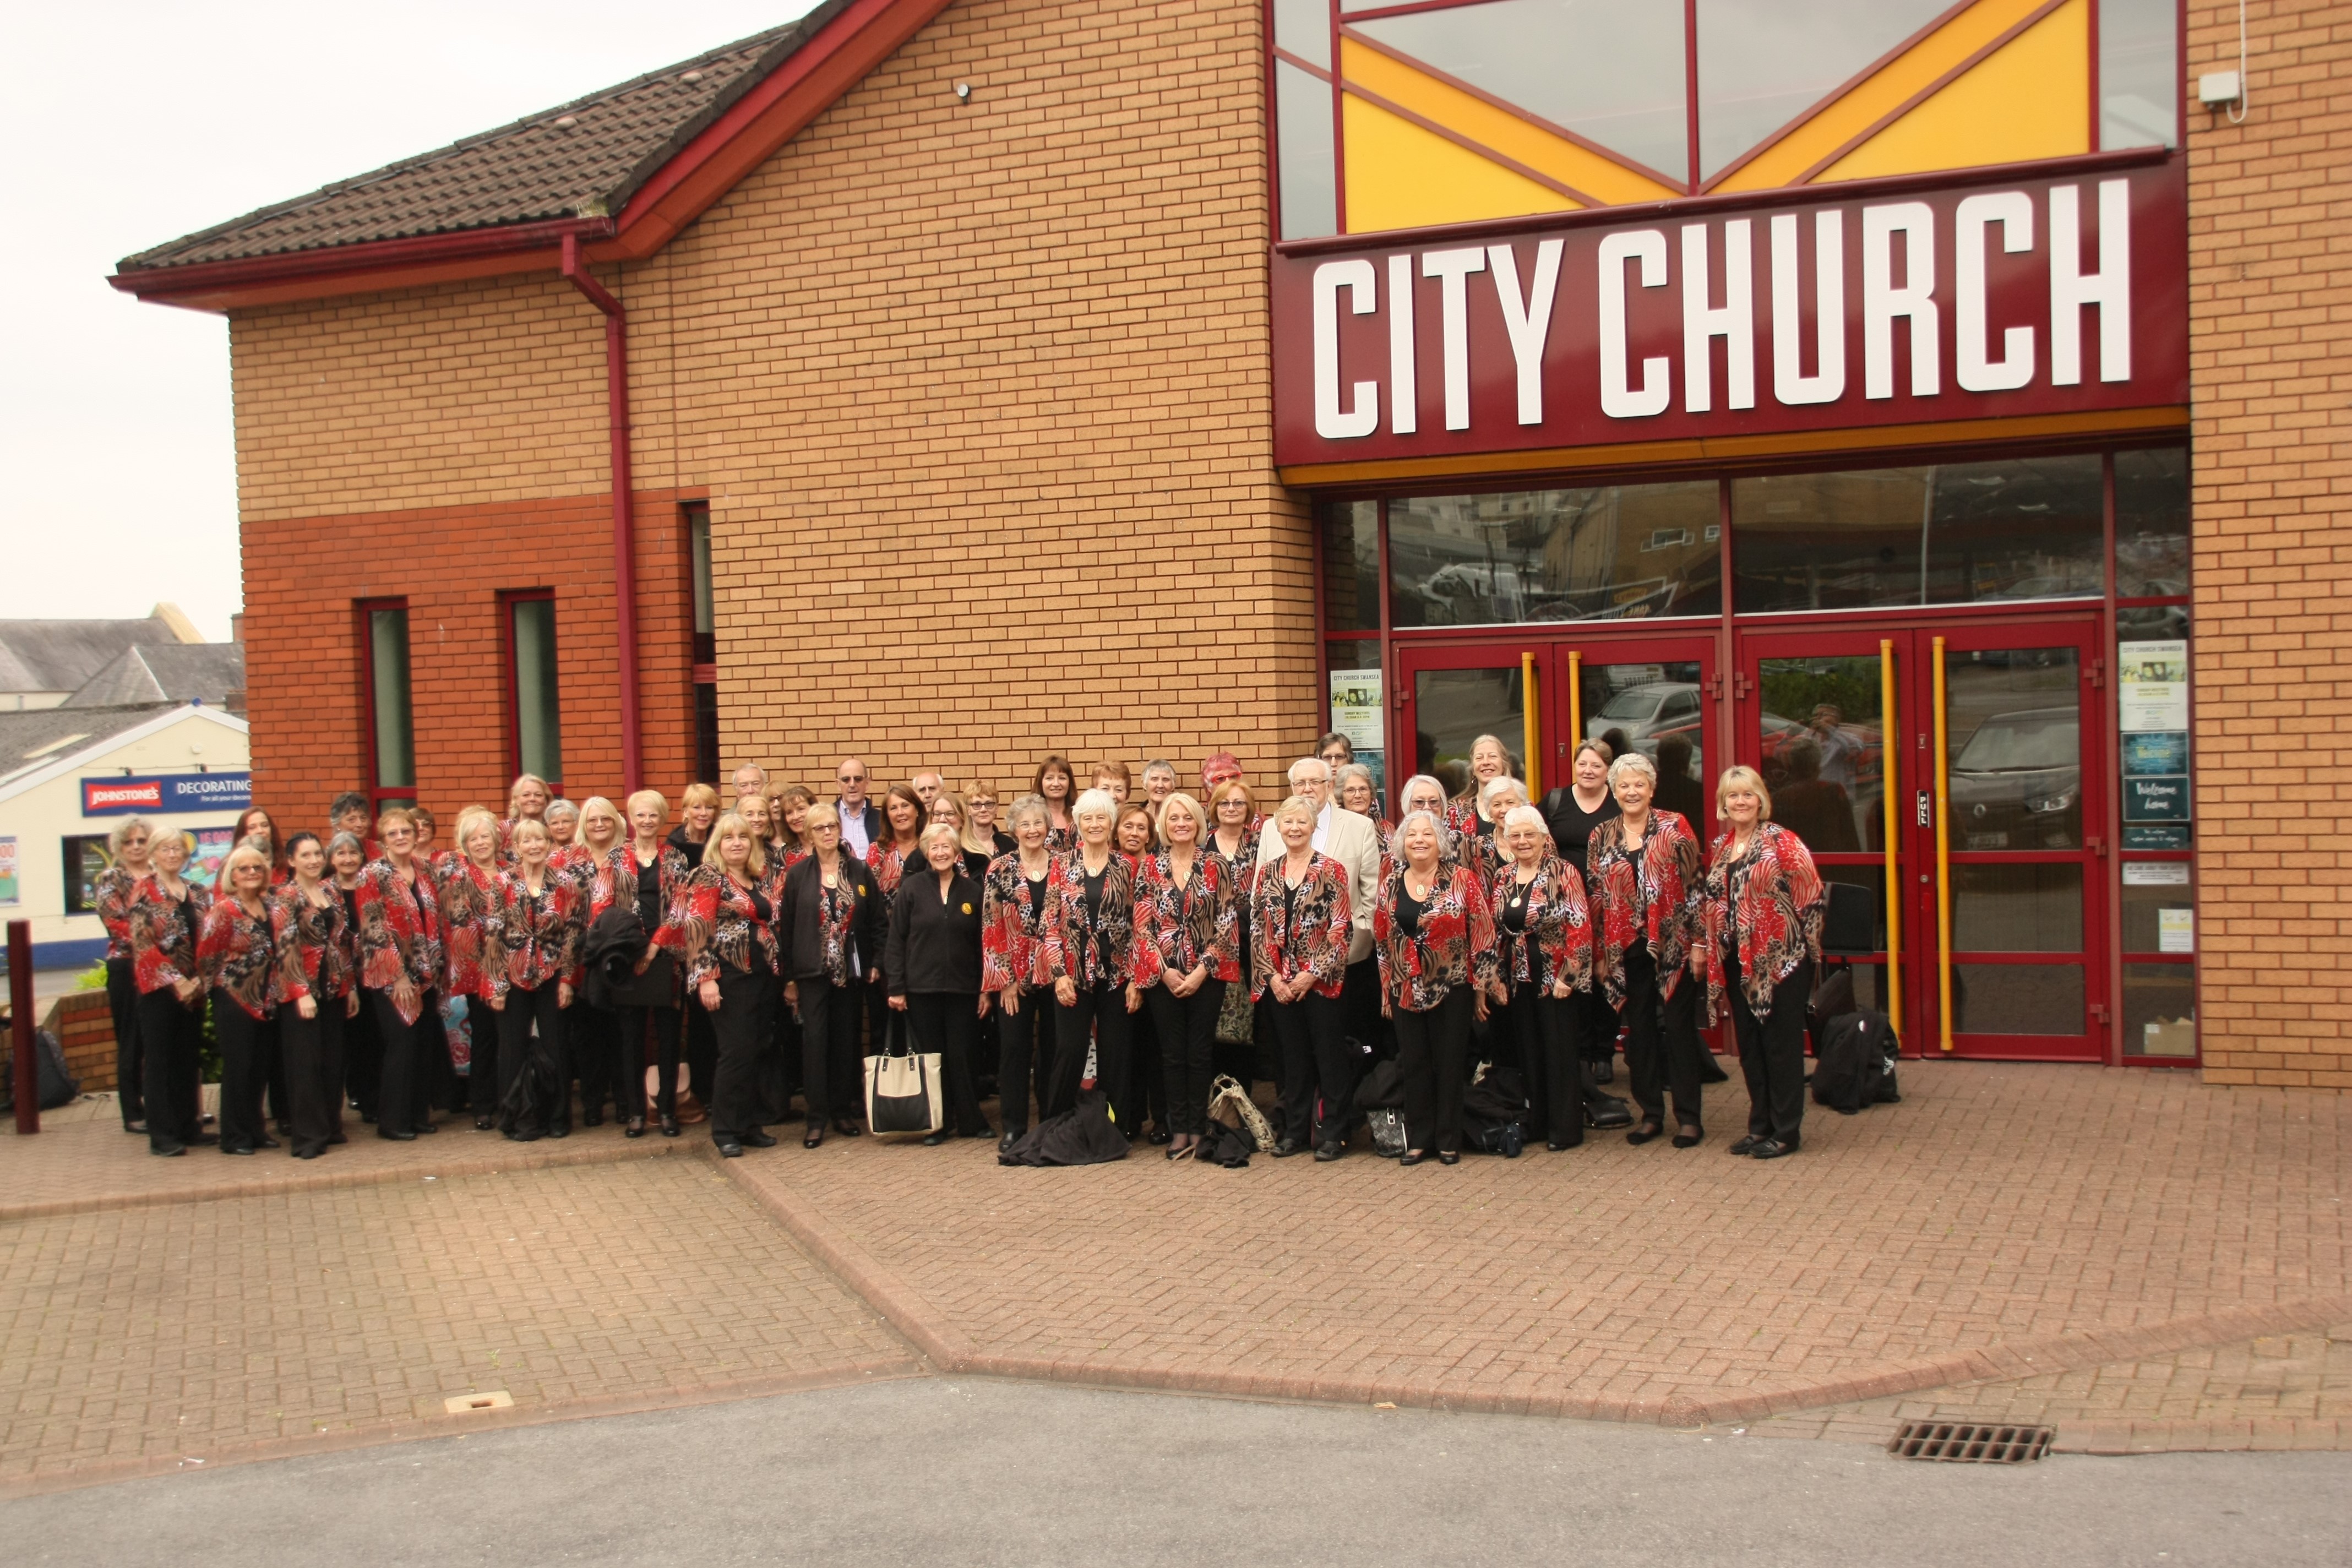 2019 Tour - Arriving to sing with Swansea MVC at City Church